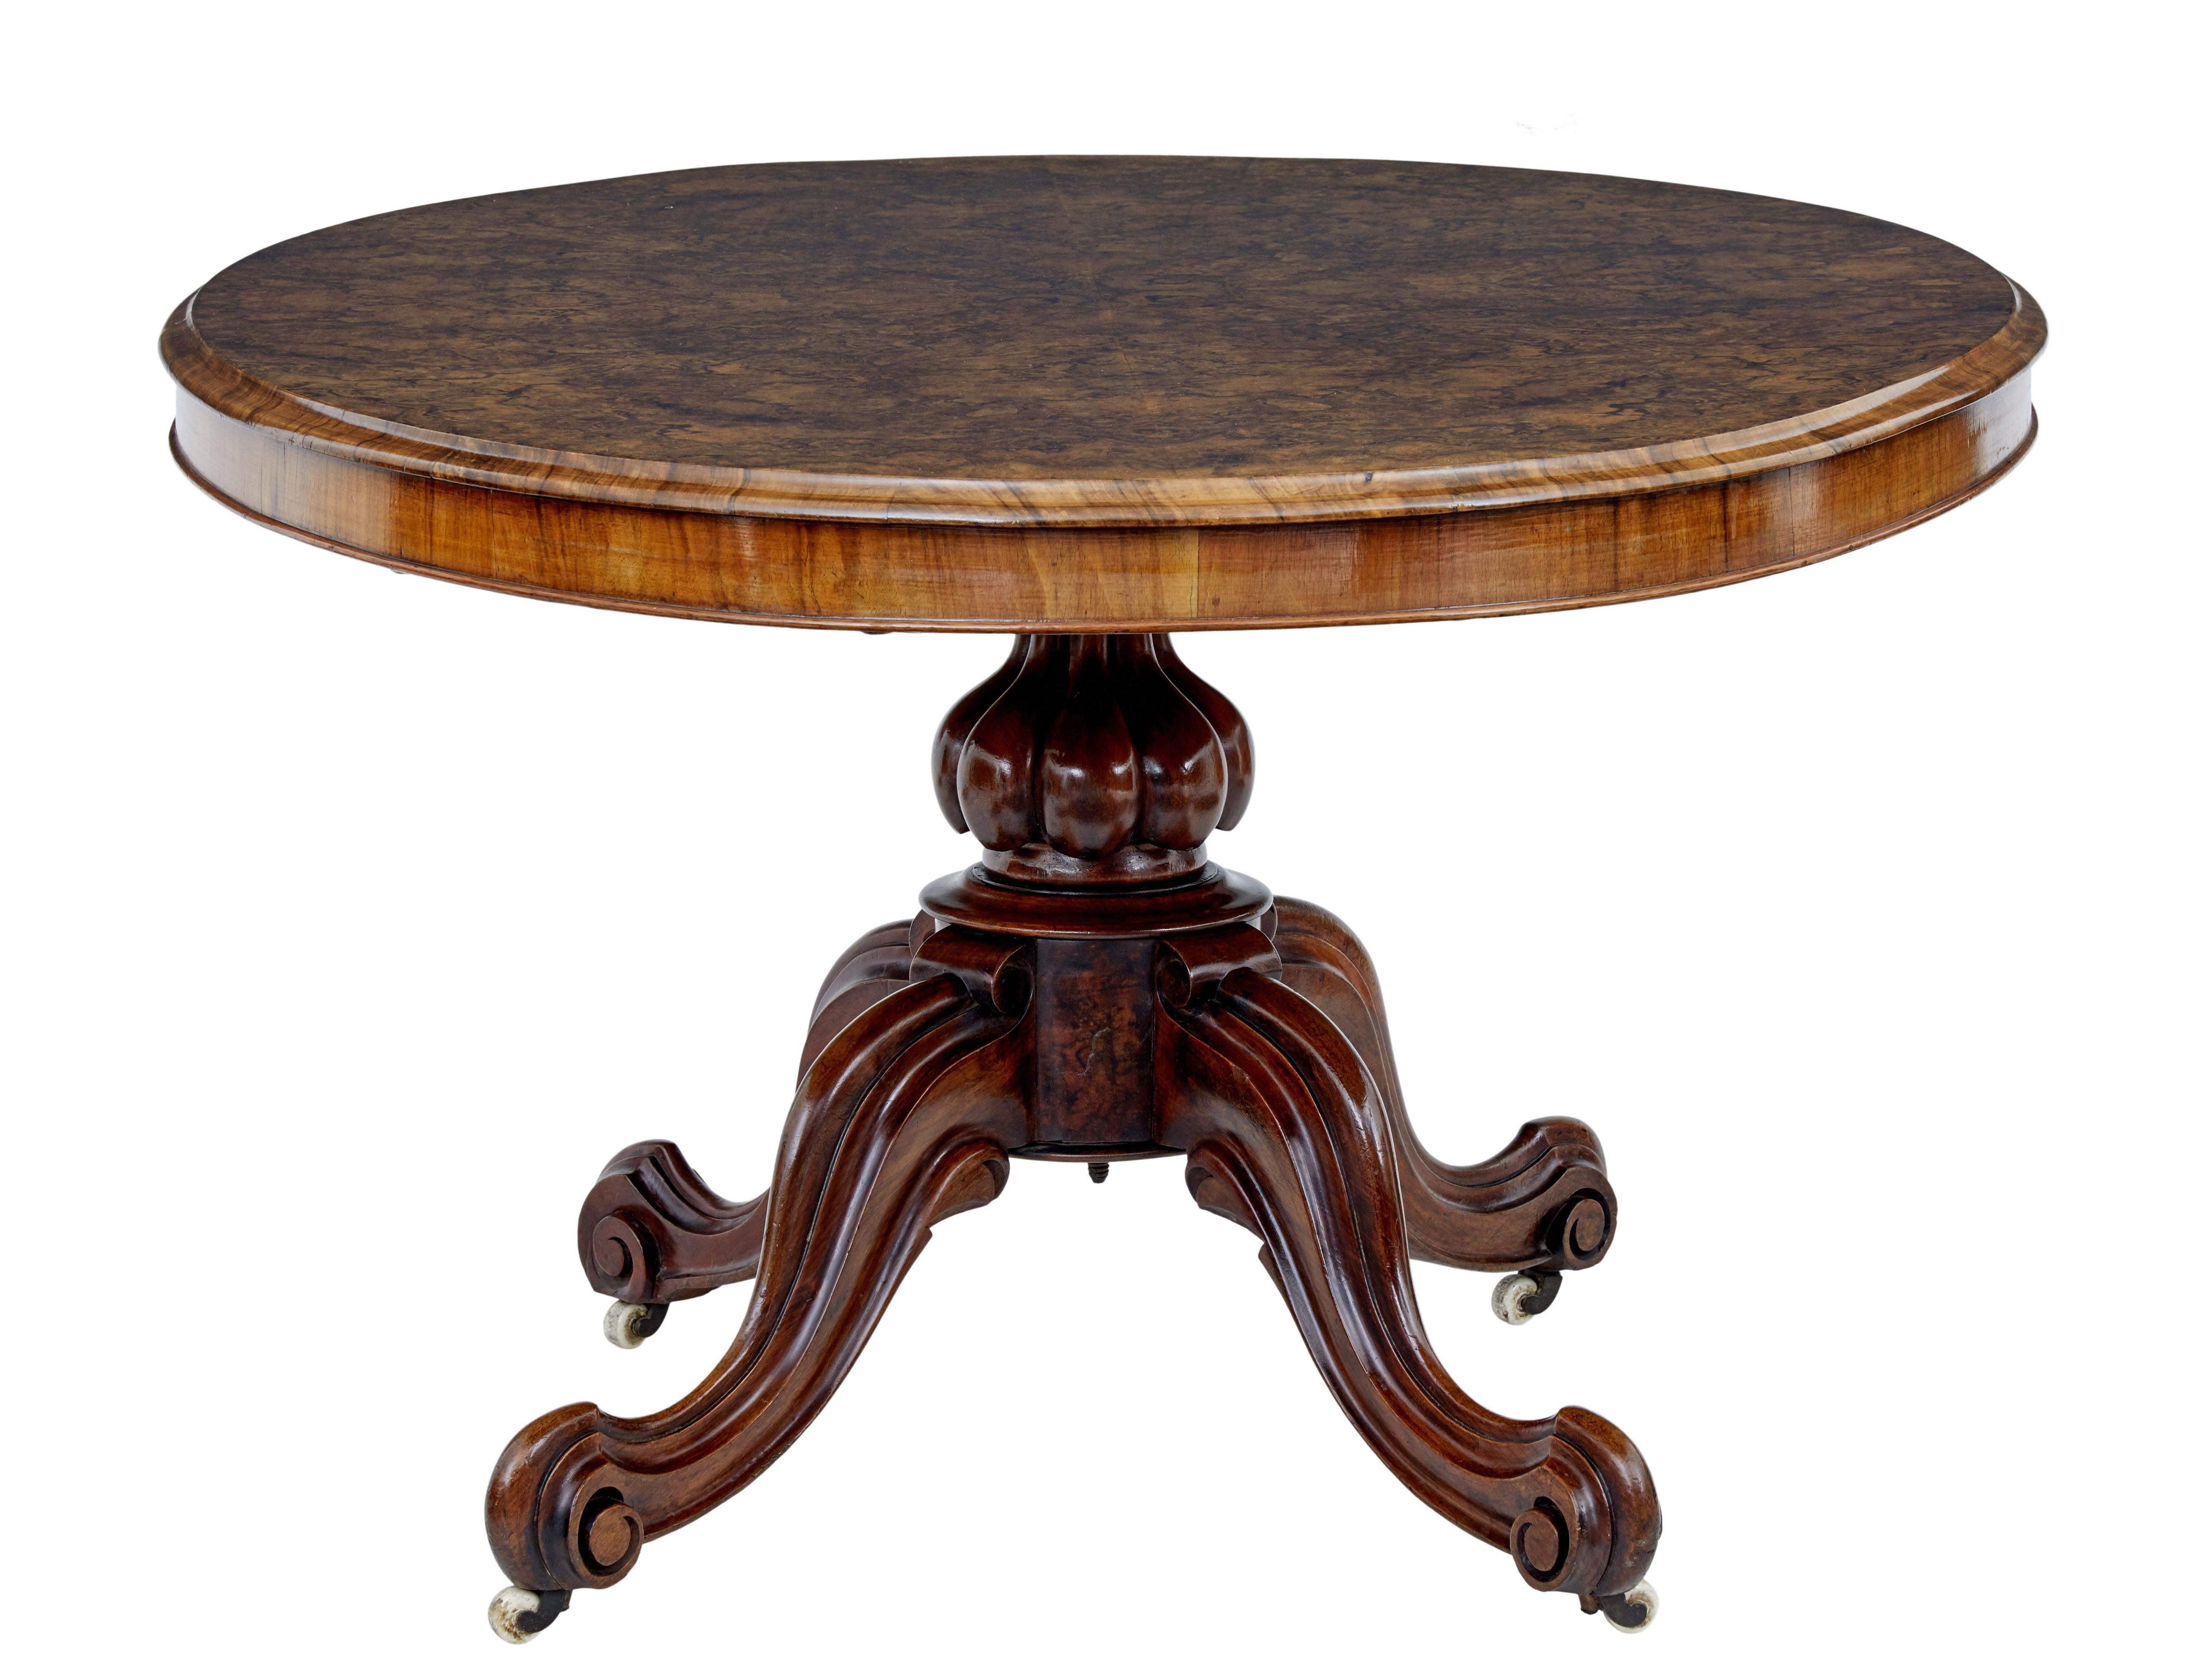 19th century High Victorian walnut breakfast table circa 1870.

Oval top with fine burr walnut veneer top. Standing on a bulbous stem and 4 scrolling legs fitted with castors.

Fitted with original tilt mechanism.

Ideal for use as a dining